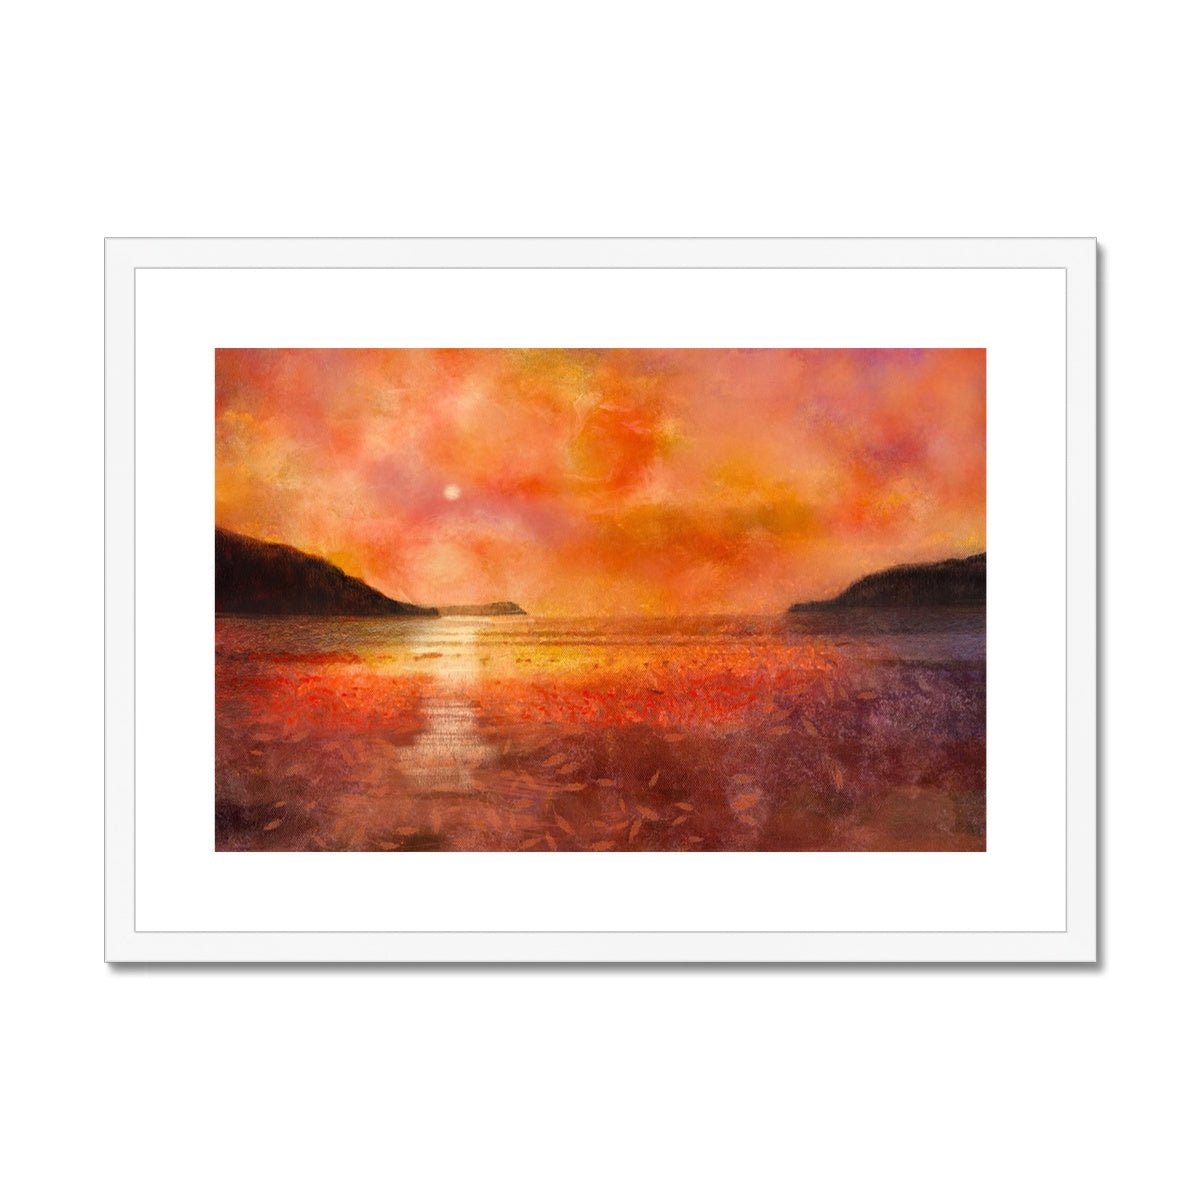 Calgary Beach Sunset Mull Painting | Framed & Mounted Prints From Scotland-Framed & Mounted Prints-Hebridean Islands Art Gallery-A2 Landscape-White Frame-Paintings, Prints, Homeware, Art Gifts From Scotland By Scottish Artist Kevin Hunter